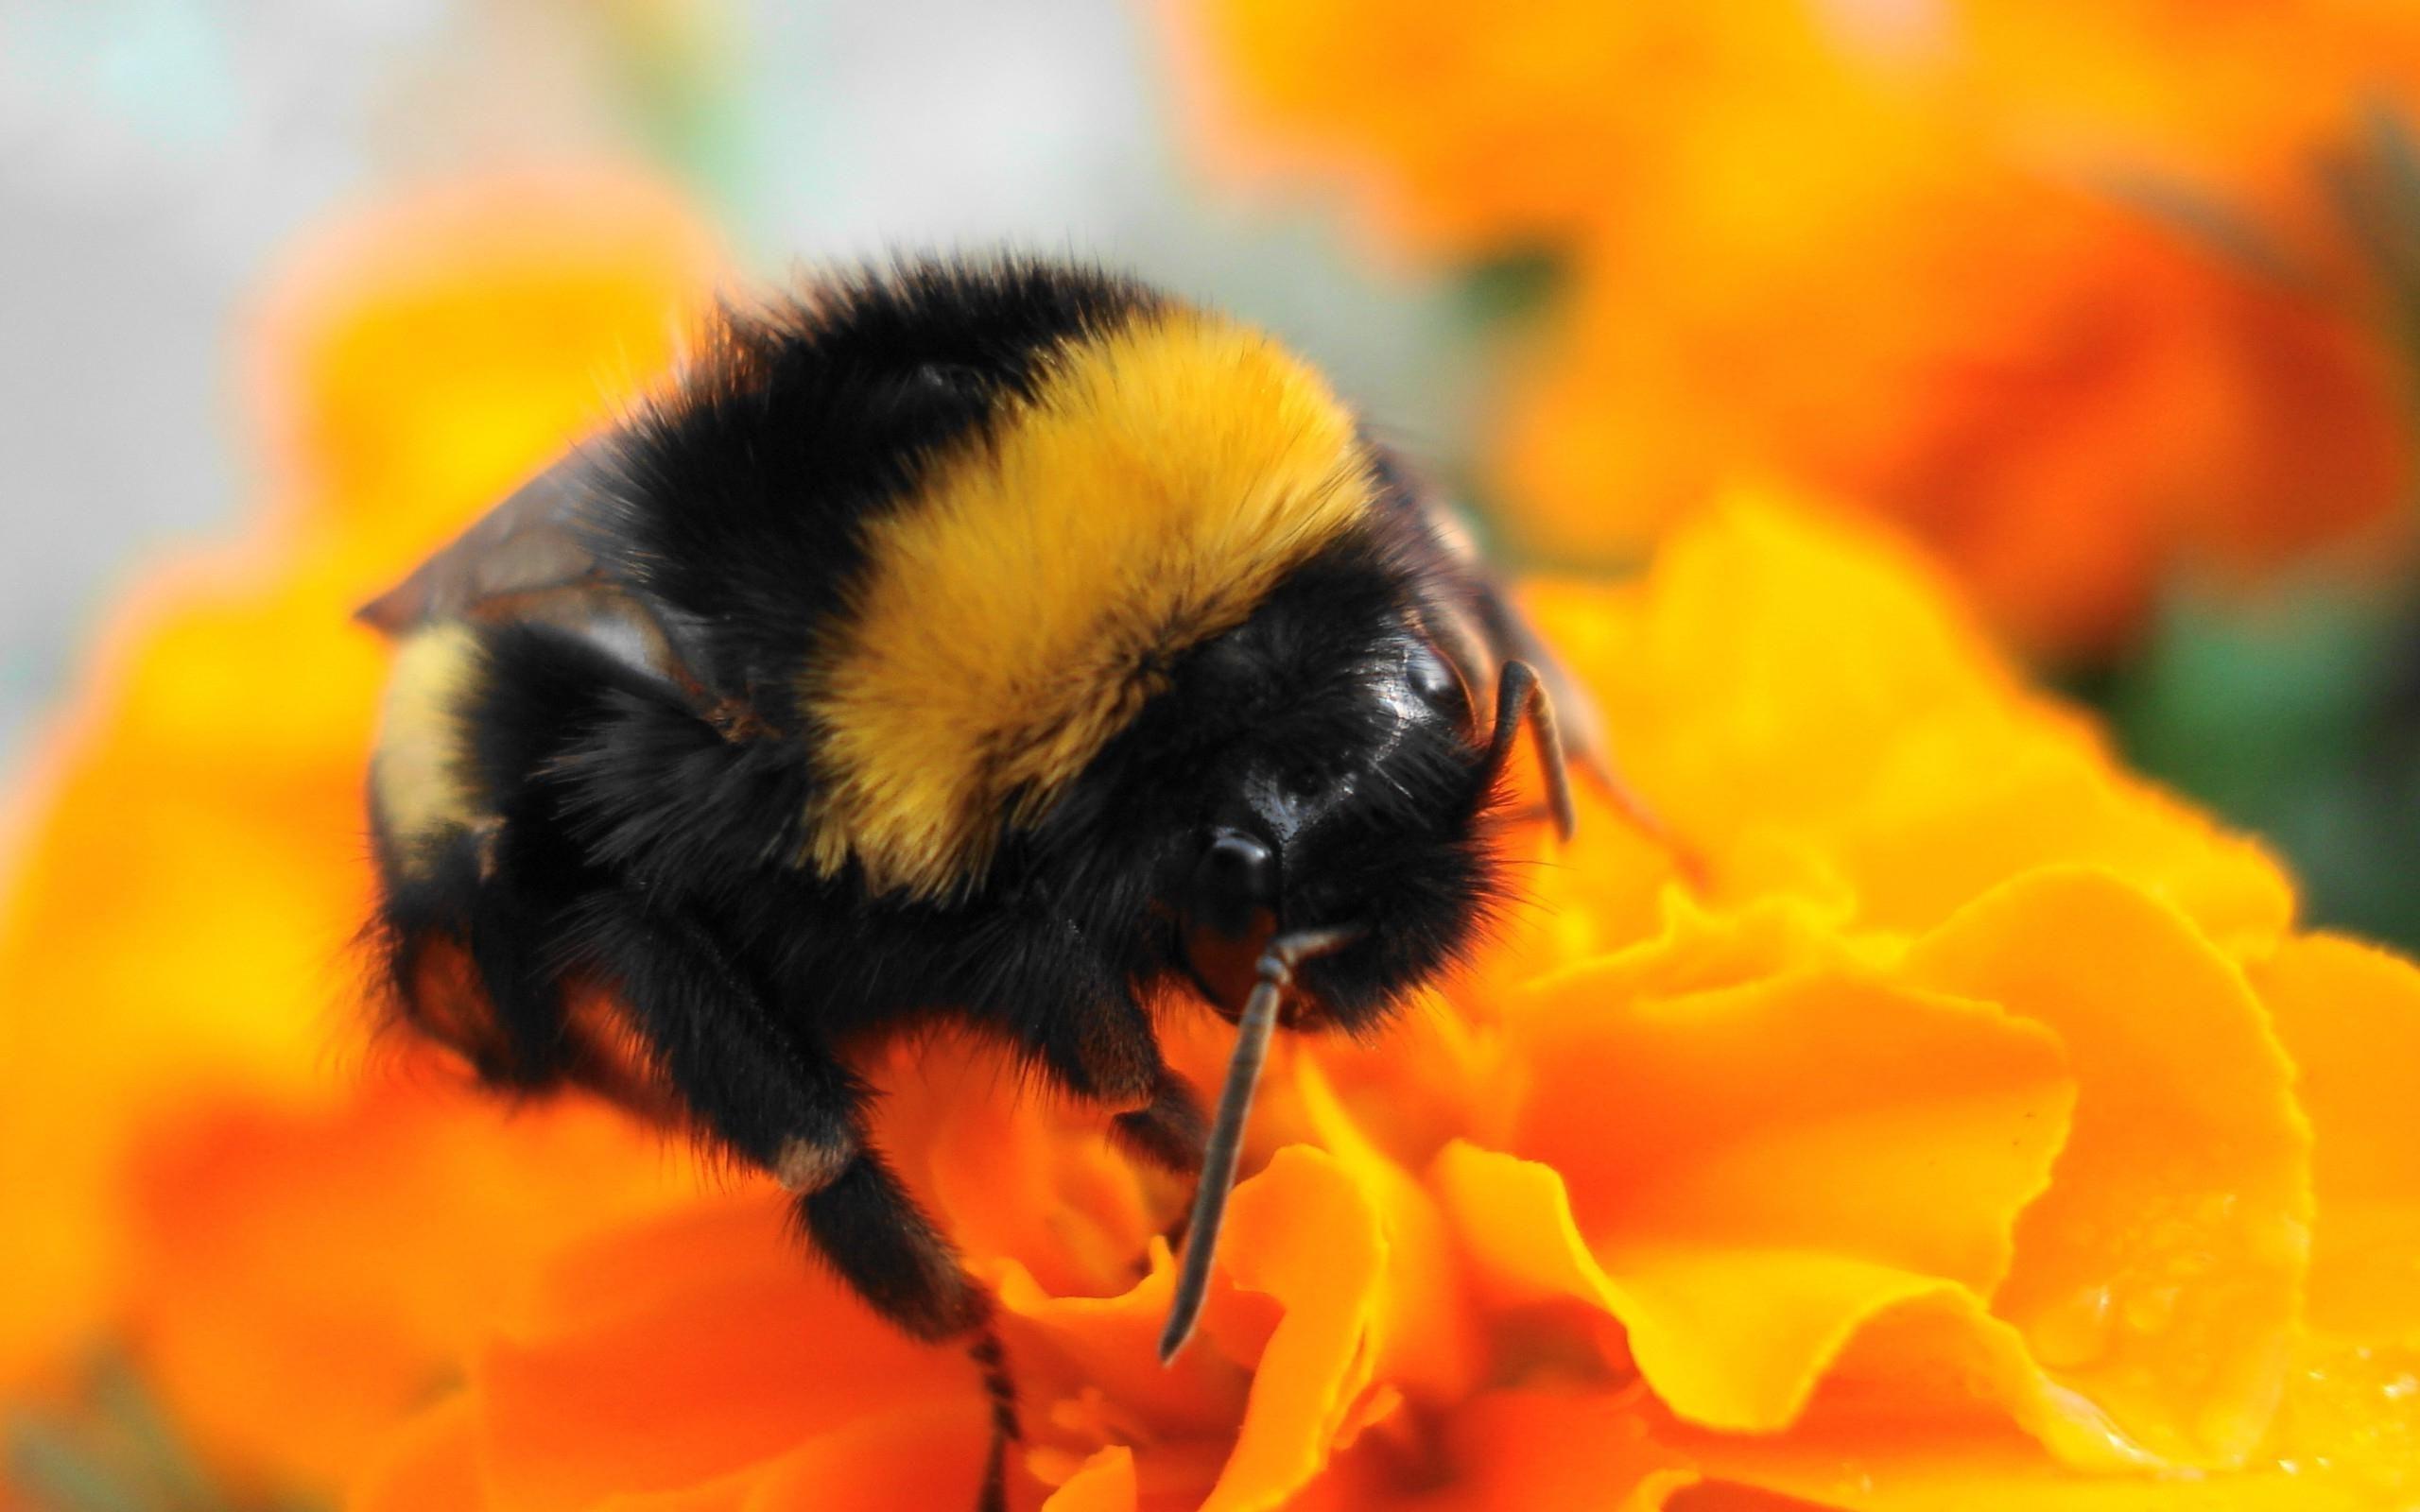 Pics For > Bumble Bee Insect Wallpaper. Bumble bee insect